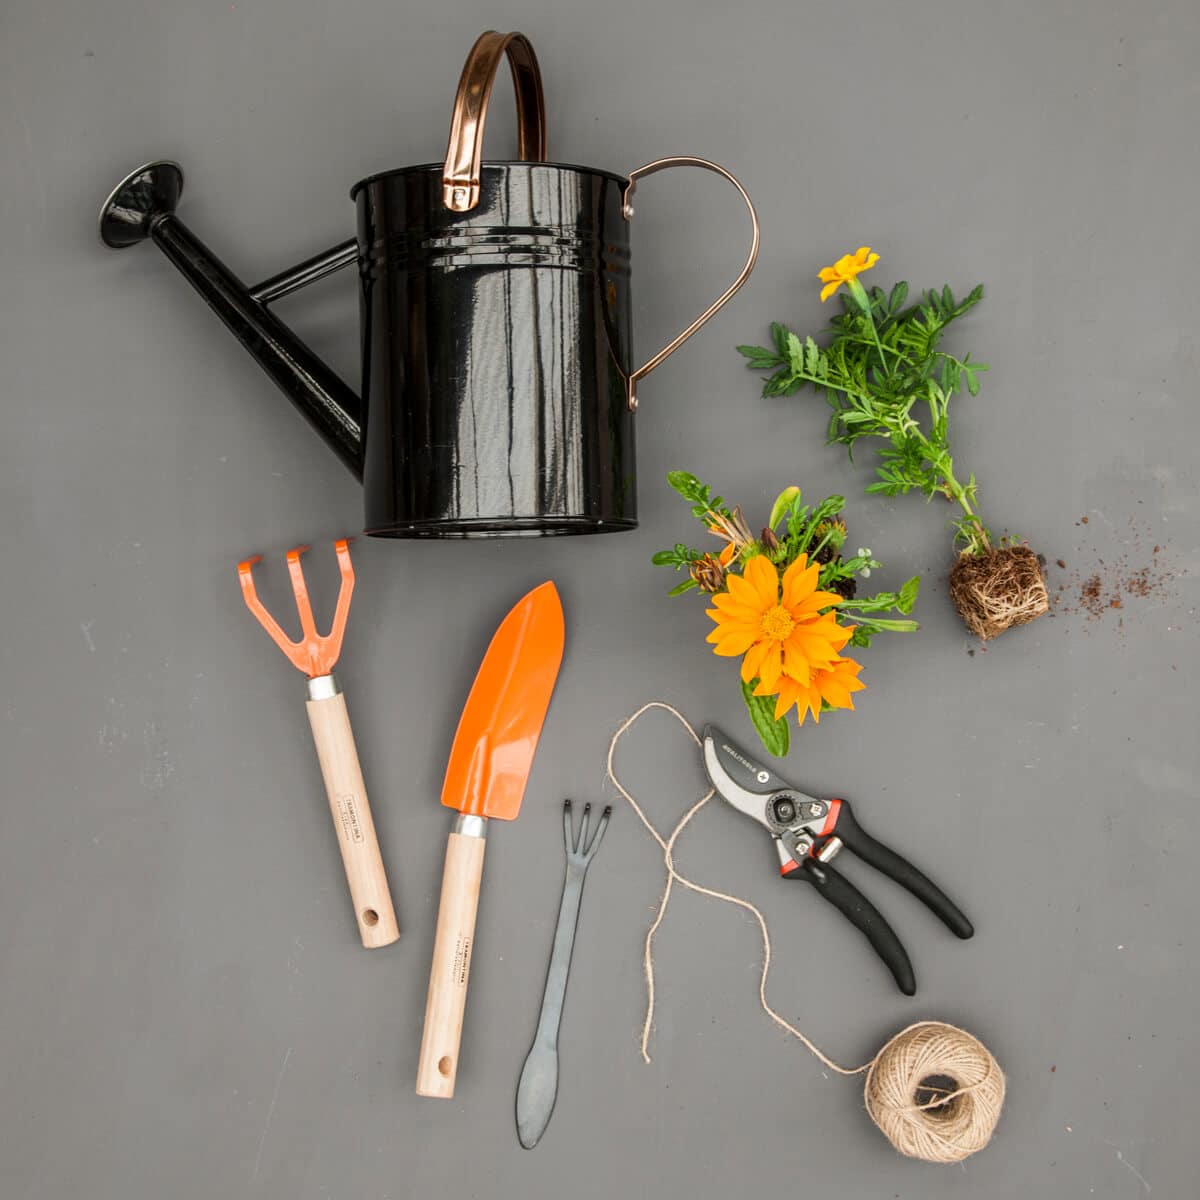 A watering can, trowel, shears, string and small potted yellow and green flowers.